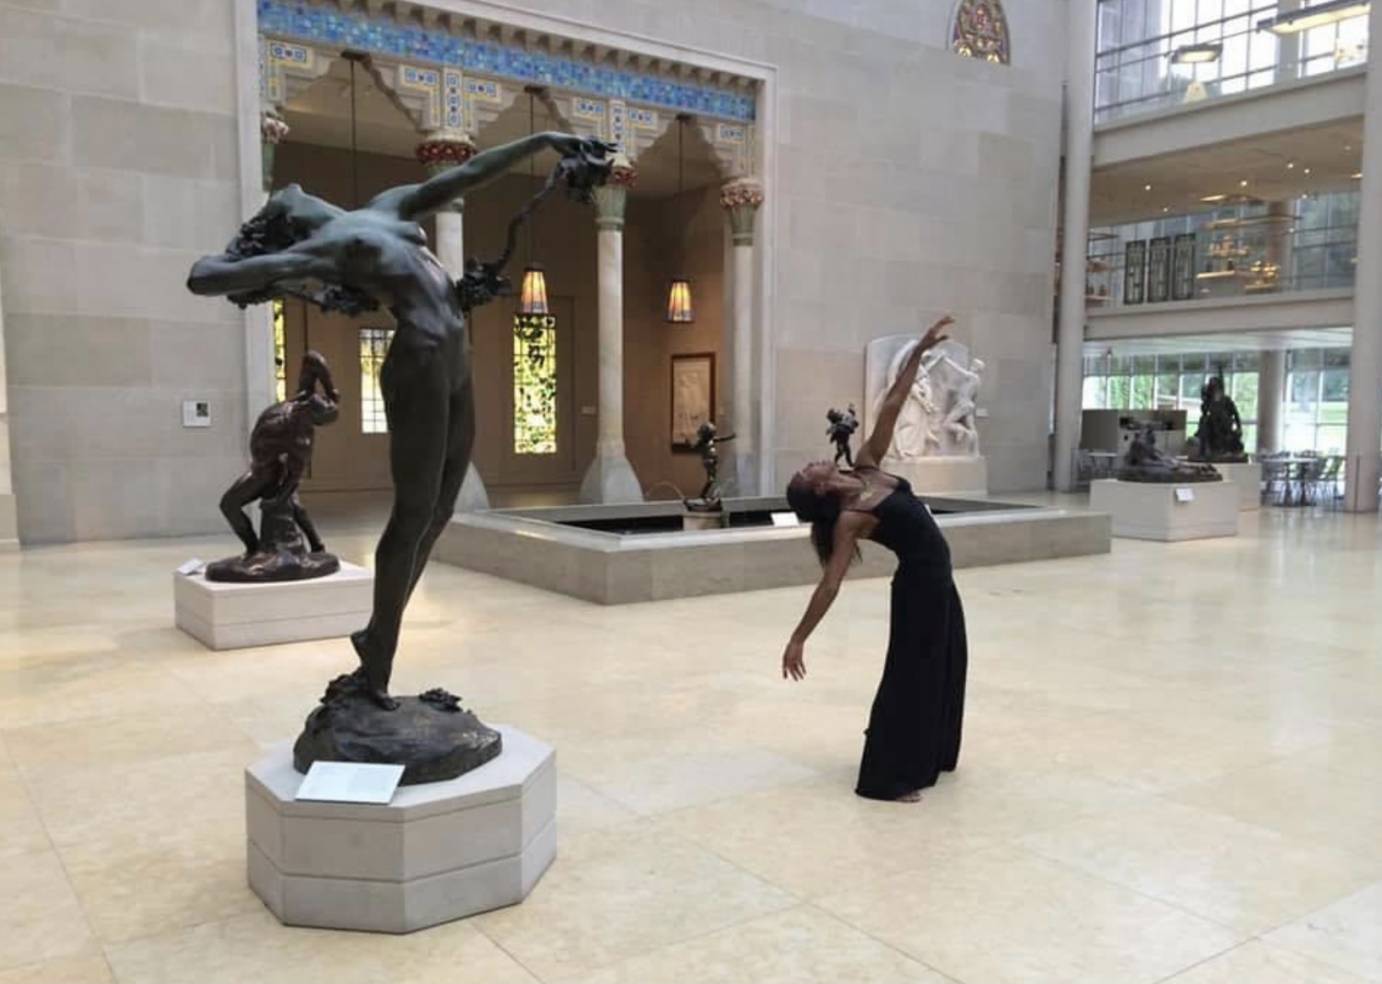 Francesca Harper a Black woman in a simple black gown with spagetti straps dances in the sculpture court of the Met. she is imitiating the pose of one of the statues leaning back with right arm extended to the sky. 